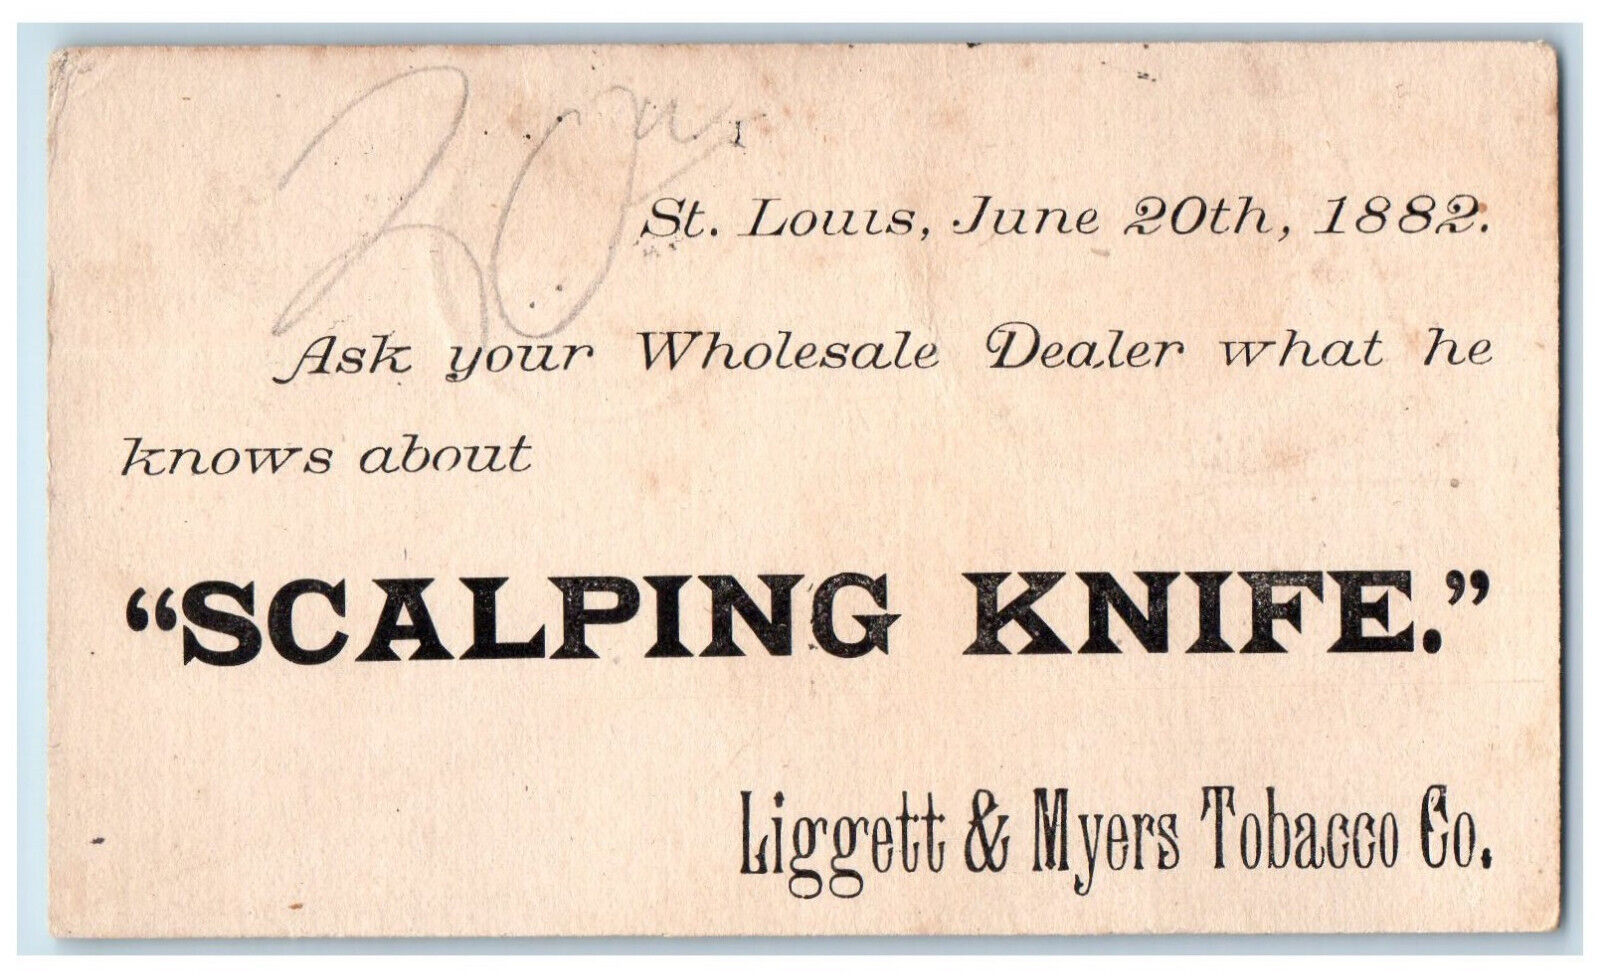 1882 Scalping Knife Liggett & Meyers Tobacco Co. St. Louis MO Postal Card